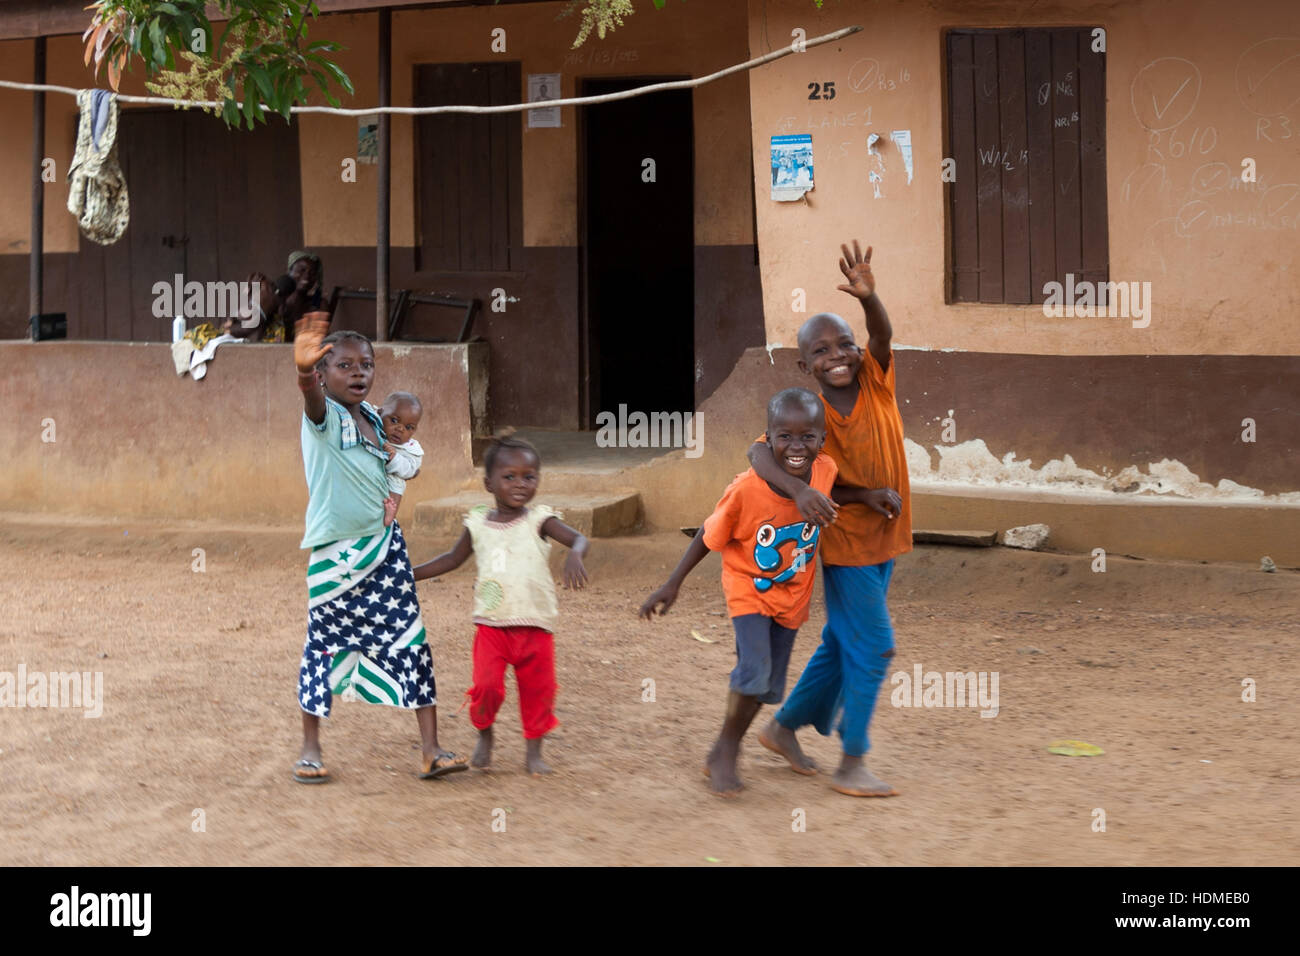 Children in Sierra Leone greeting and waving hands Stock Photo